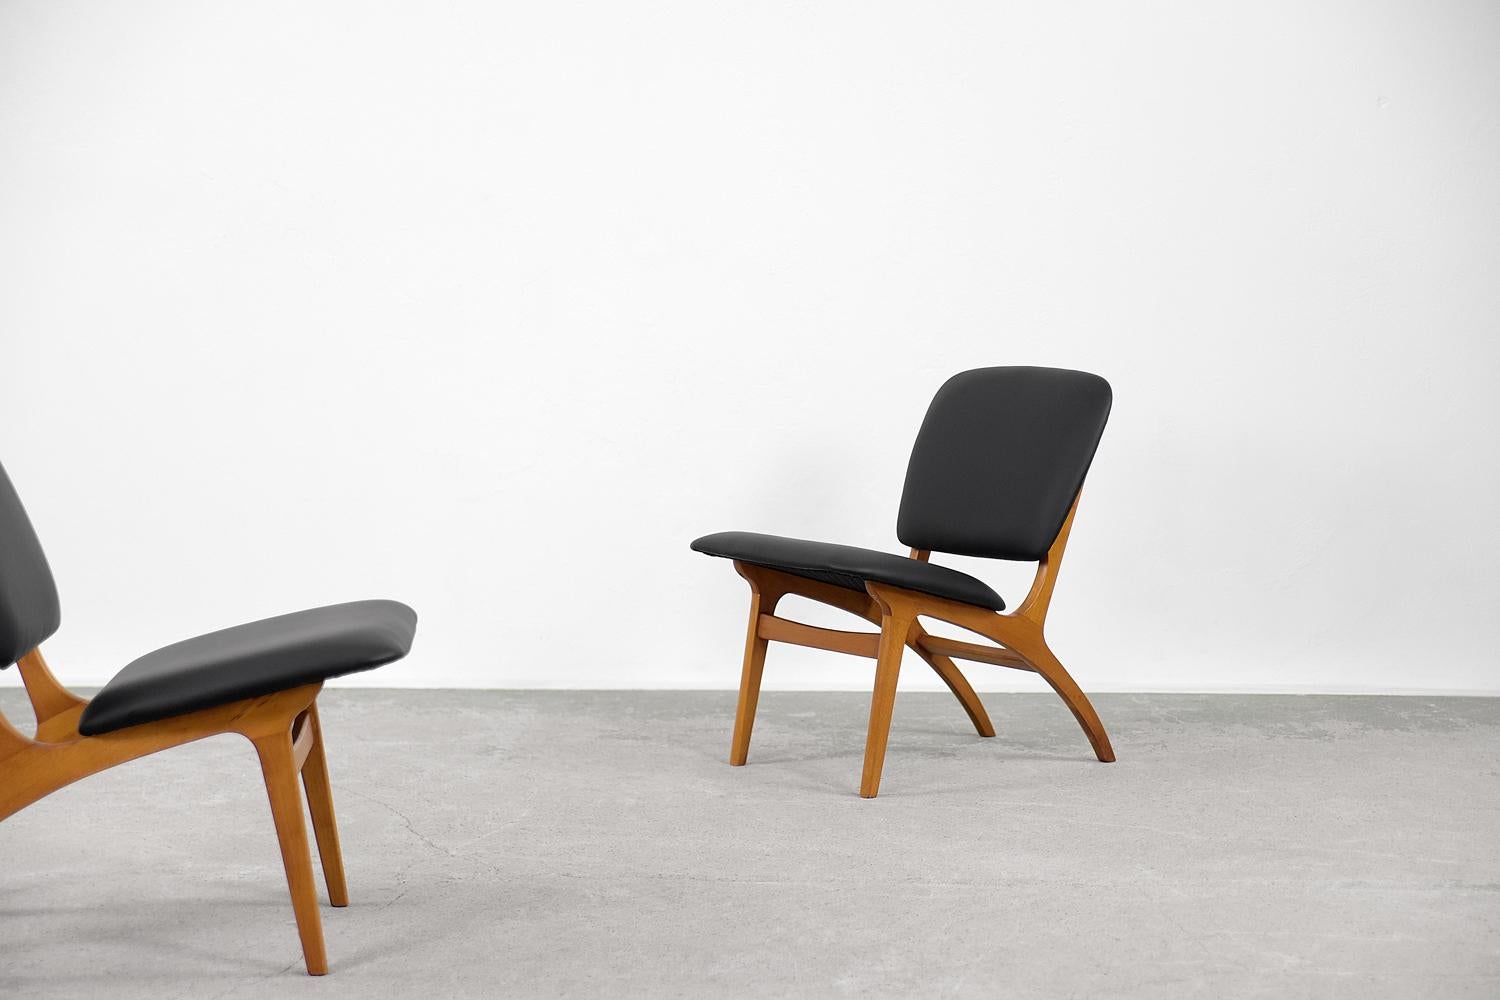 Faux Leather Pair of Mid-Century Modern Vintage Jylland Beech Wood Chairs from Jio Möbler For Sale